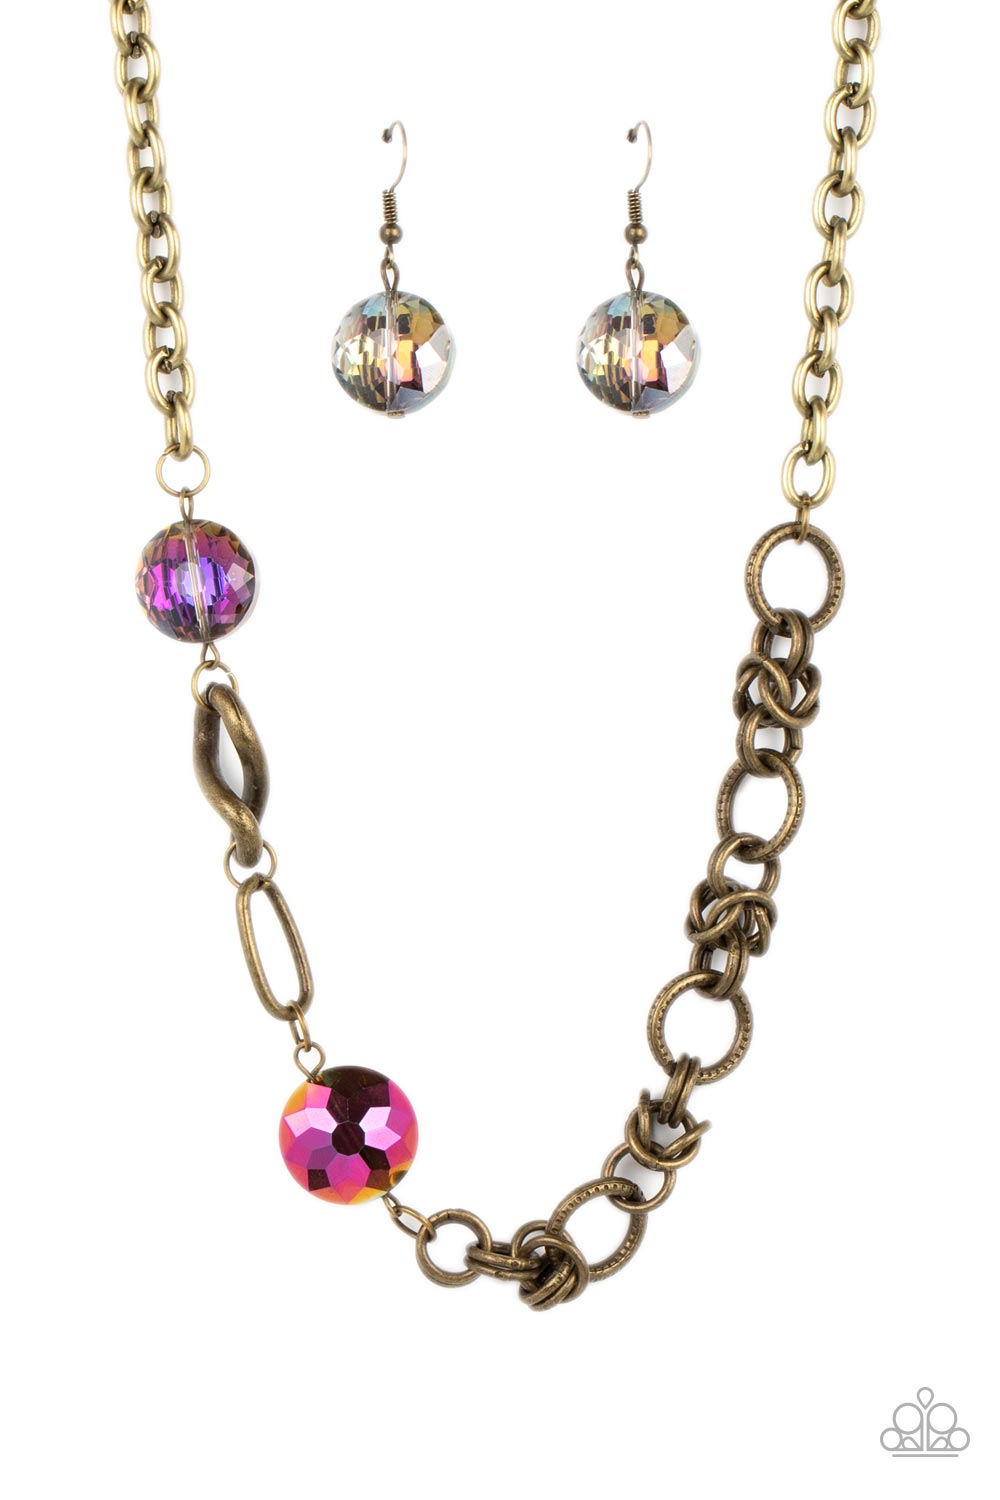 Paparazzi Accessories Celestially Celtic - Brass Thick links of brass twist into Celtic knot-like details, linking together with textured brass hoops along the collar. A pair of faceted, saucer-shaped crystal beads, dipped in a reflective oil spill coatin